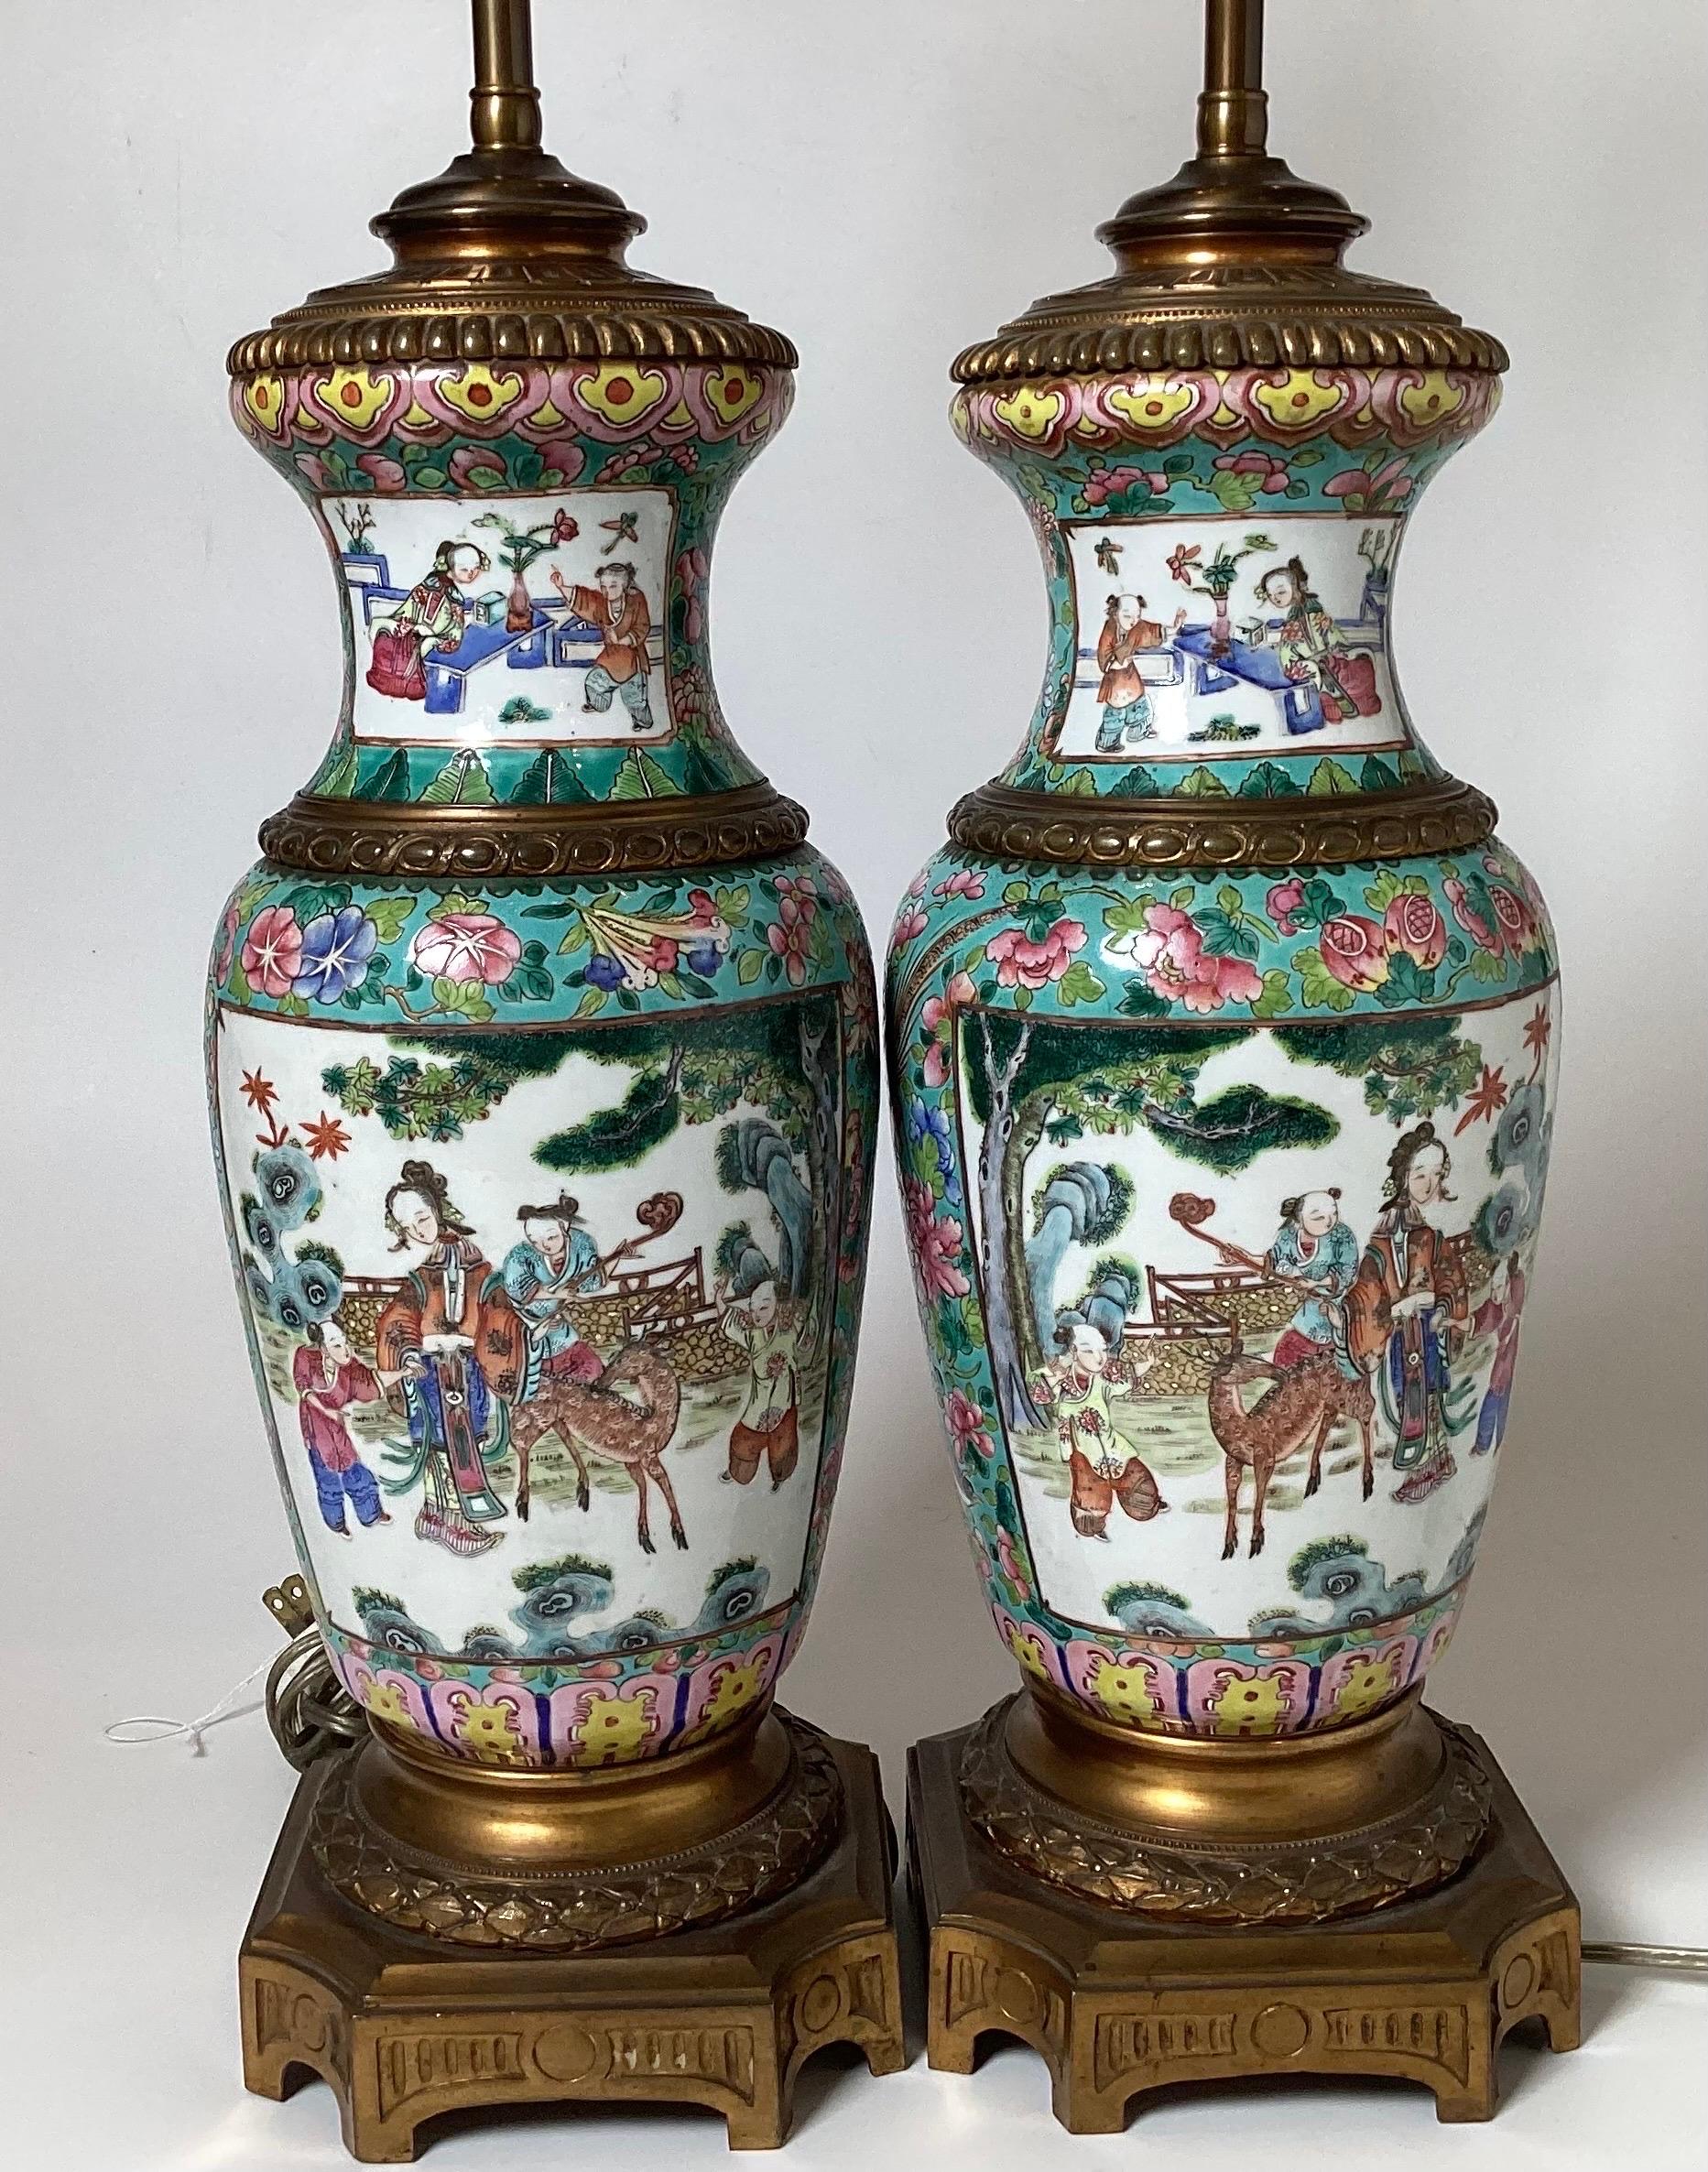 Stunning Pair of Early 19th Century Chinese Export Bronze Mounted Lamps In Good Condition For Sale In Lambertville, NJ